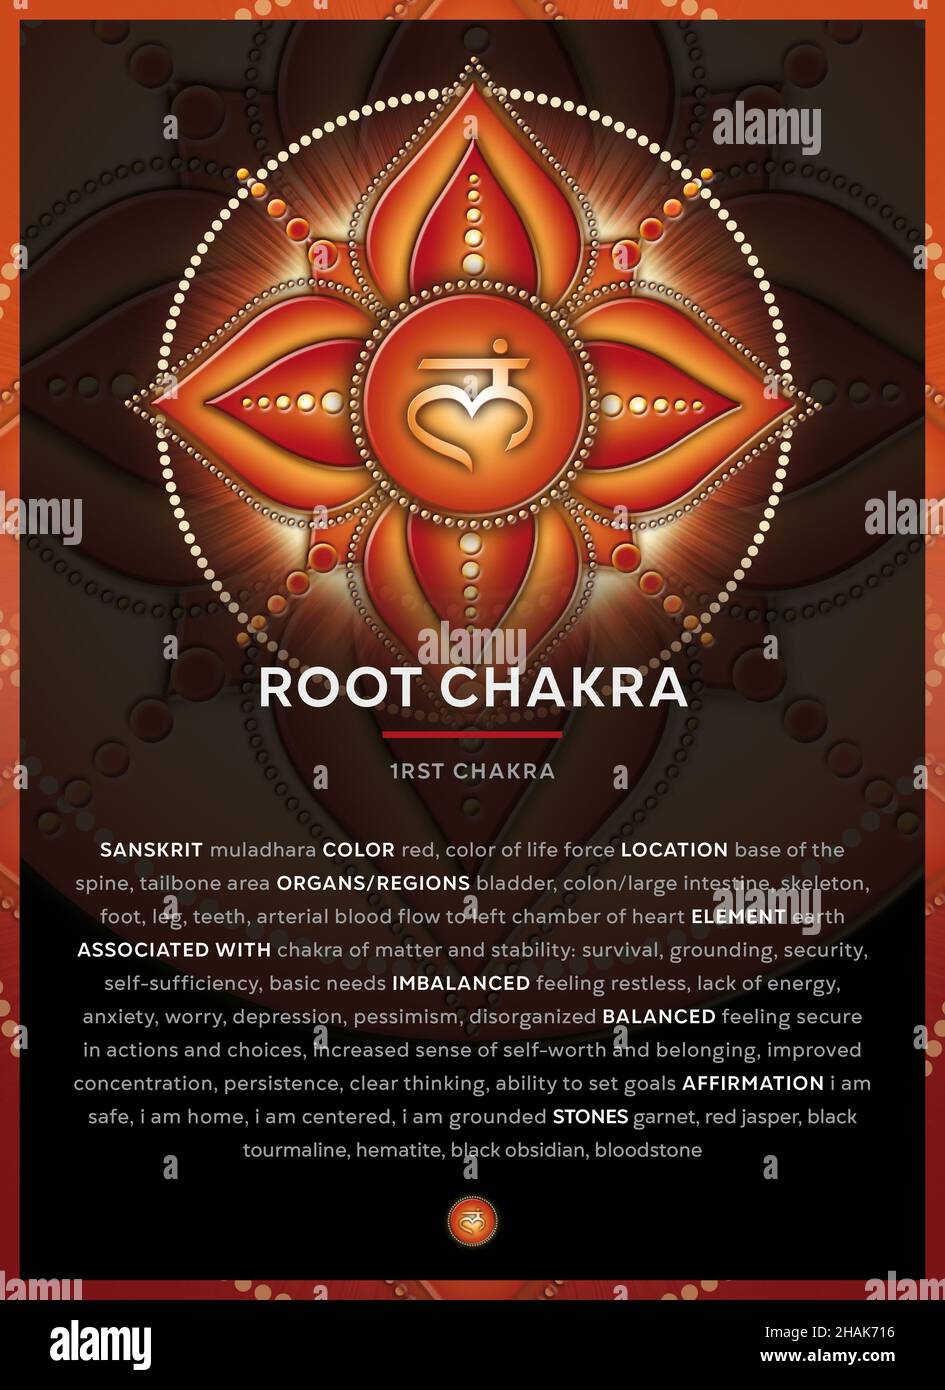 ROOT CHAKRA SYMBOL (1. Chakra, Muladhara), Banner, Poster, Cards, Infographic with description, features and affirmations. Stock Photo